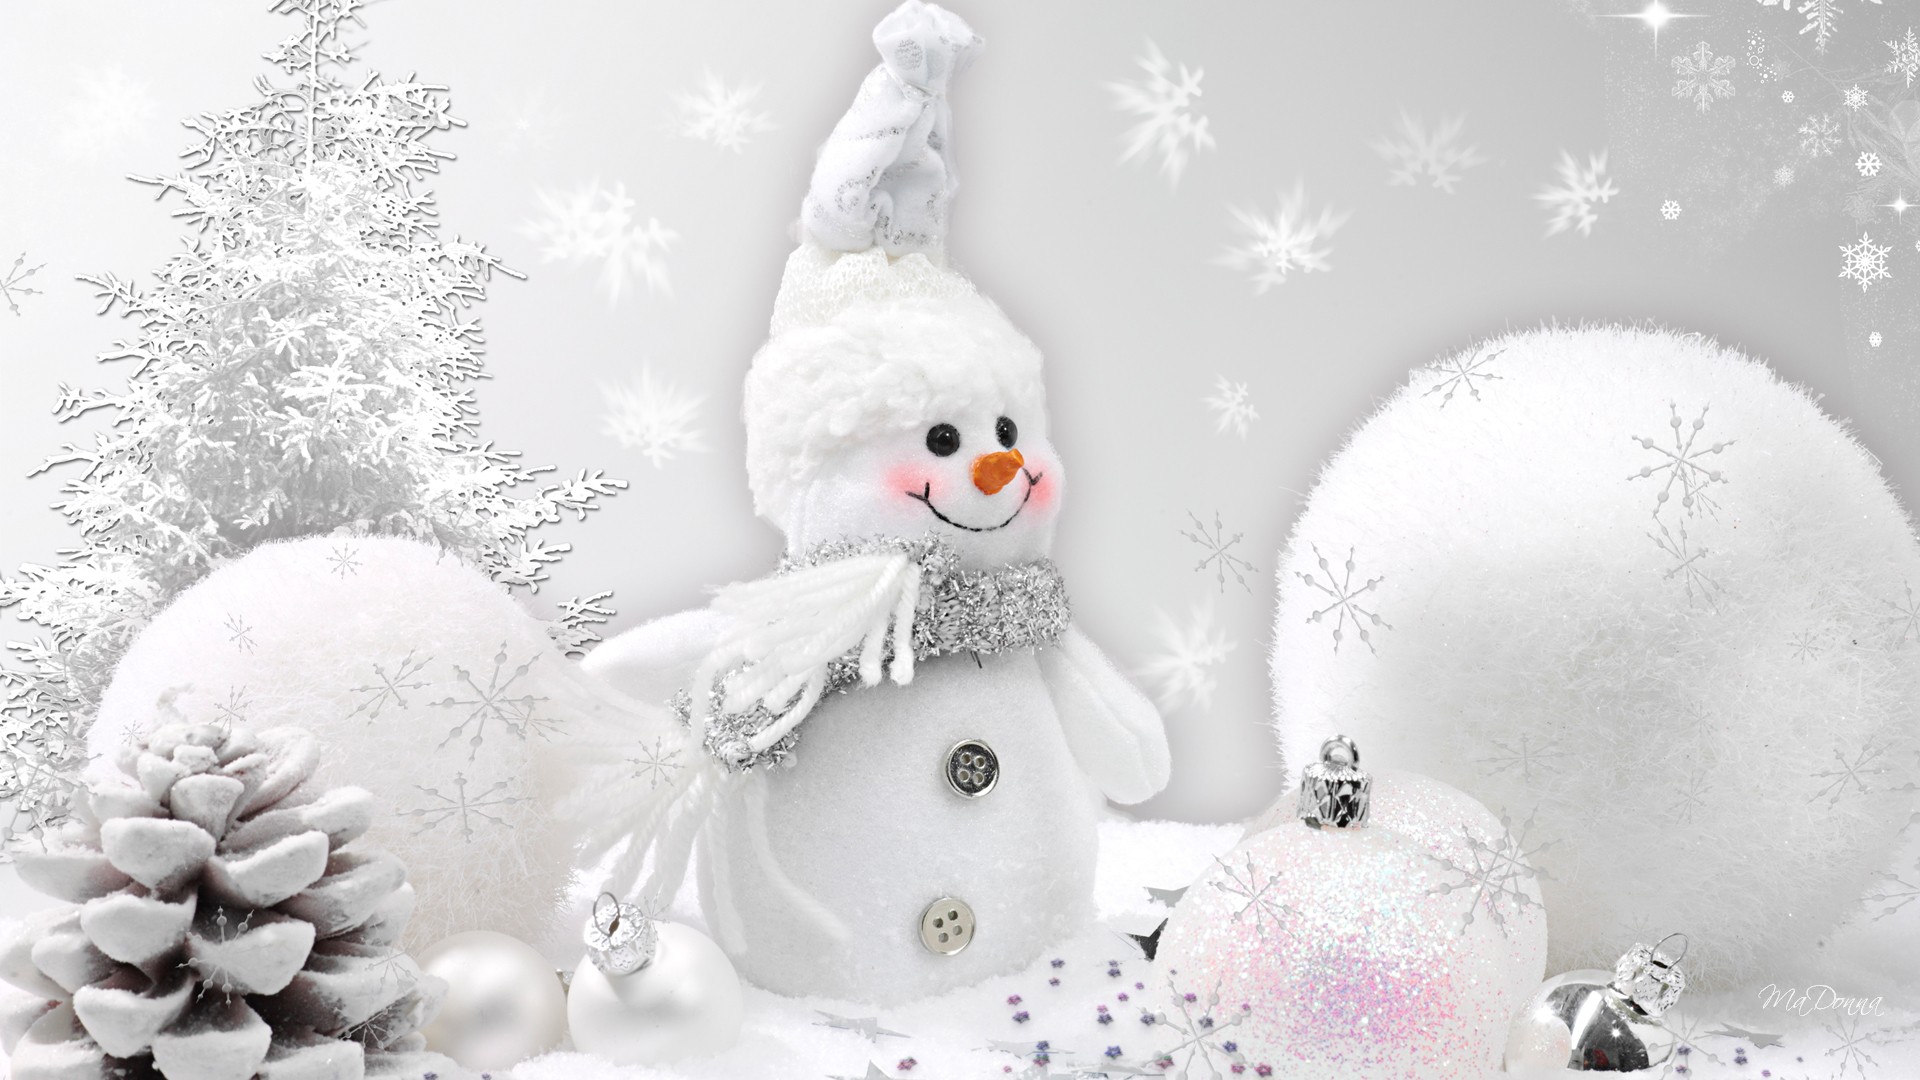 Christmas Winter Wallpaper Pictures - White Christmas Background ...